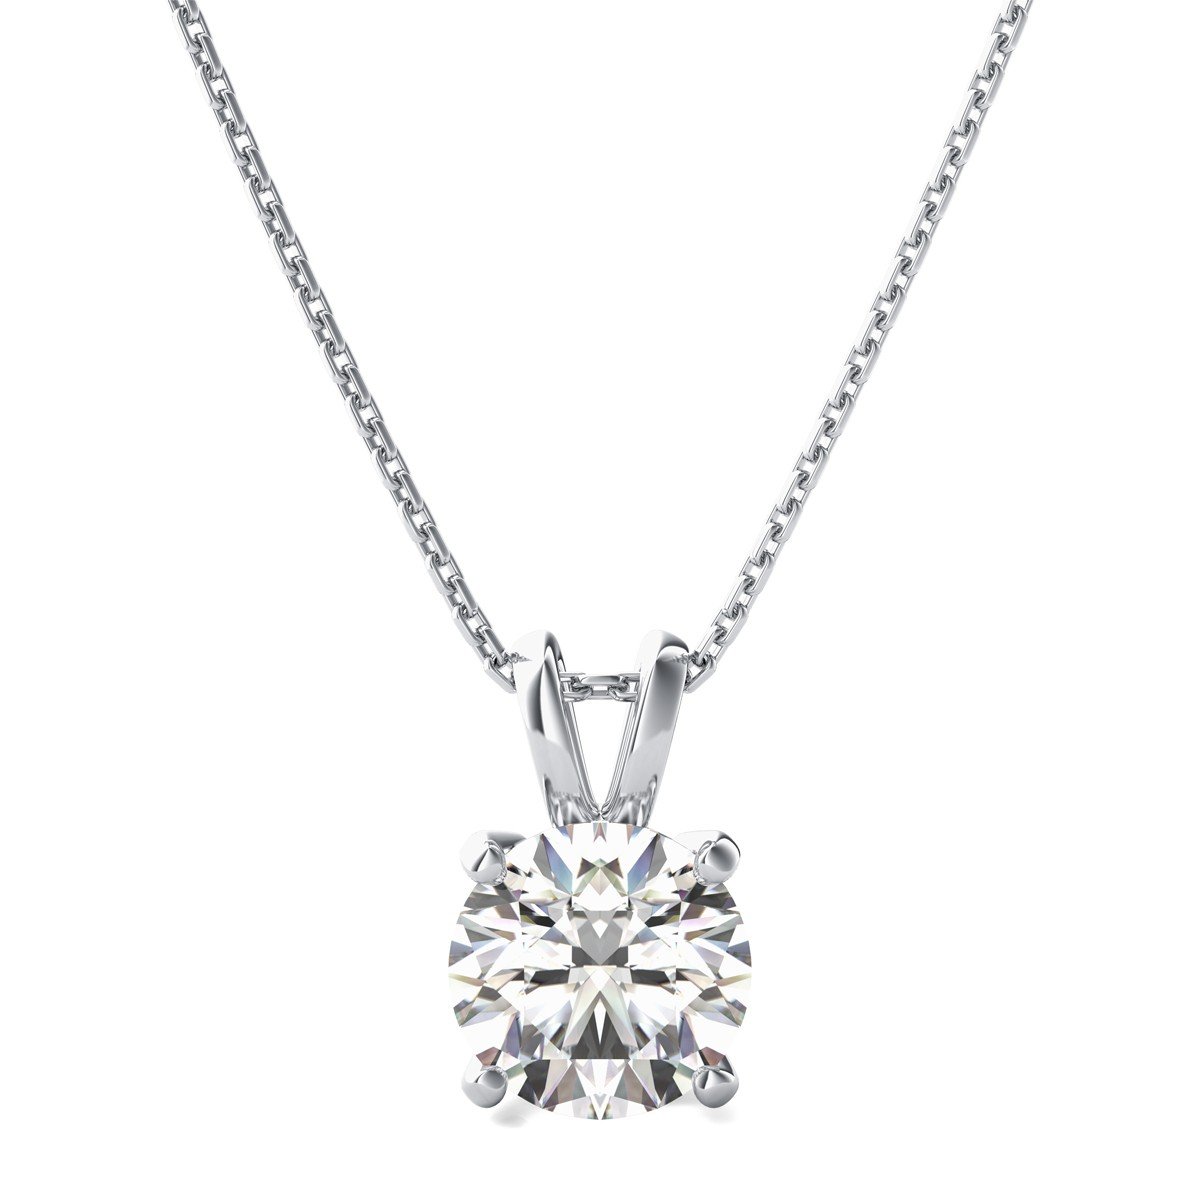 3.0 ct Brilliant Round Cut Stunning Genuine Moissanite Ideal VVS1 D Solitaire Pendant Necklace With 18